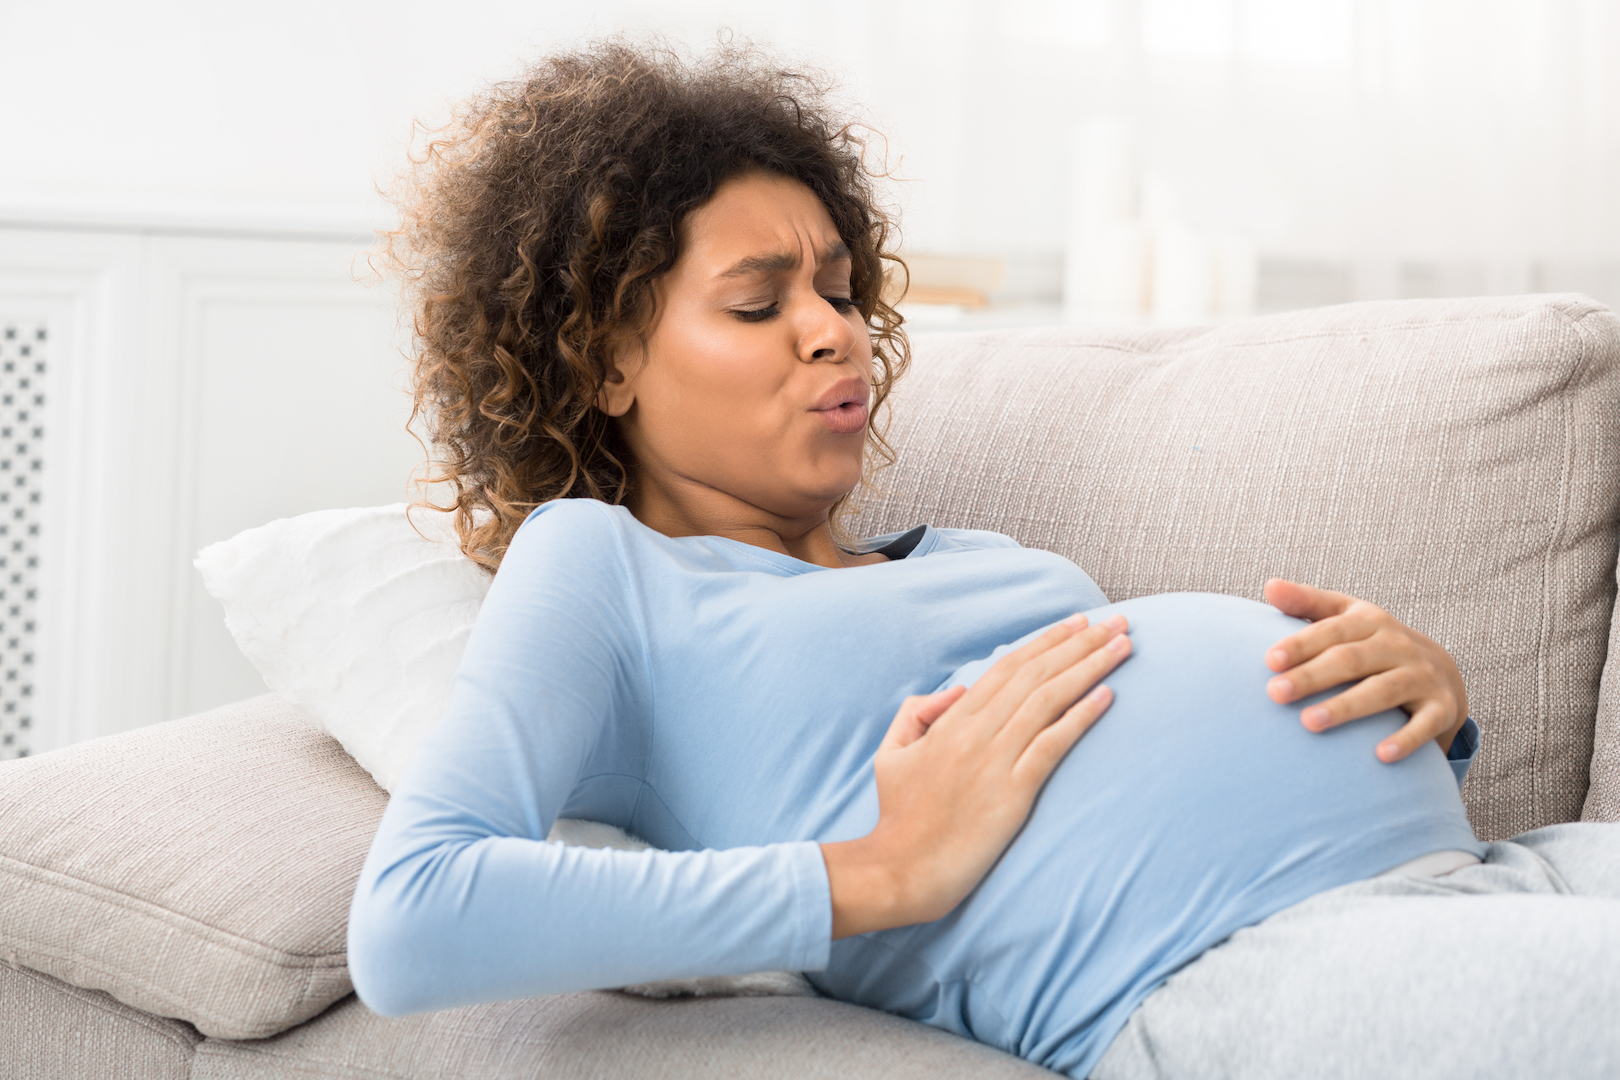 Signs of labor: Pregnant woman winces in pain as she feels a contraction while lying on the couch.